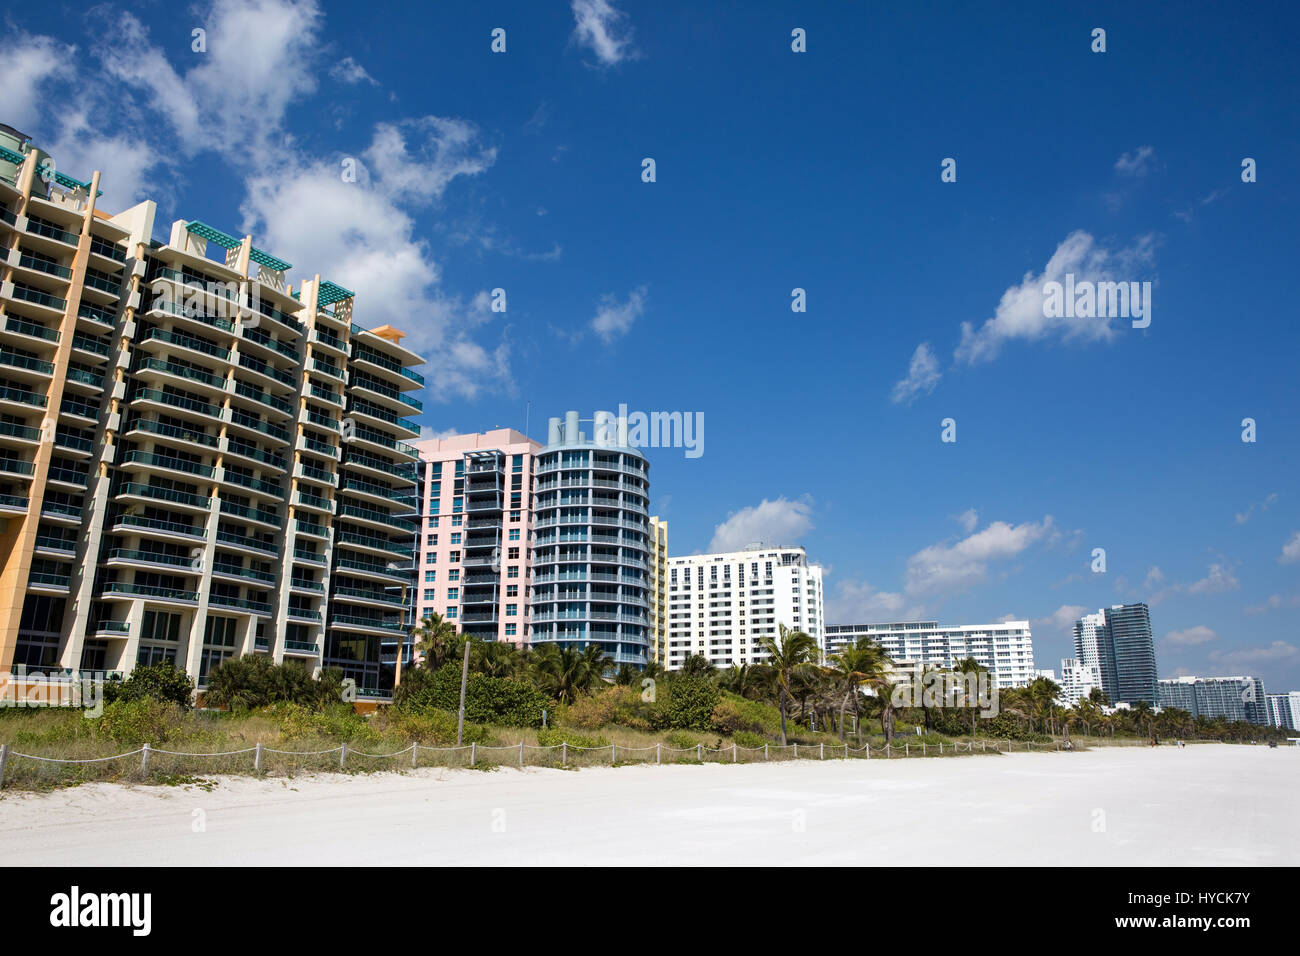 Hotels and condominiums line the white sandy Miami South Beach, Florida, USA. Stock Photo